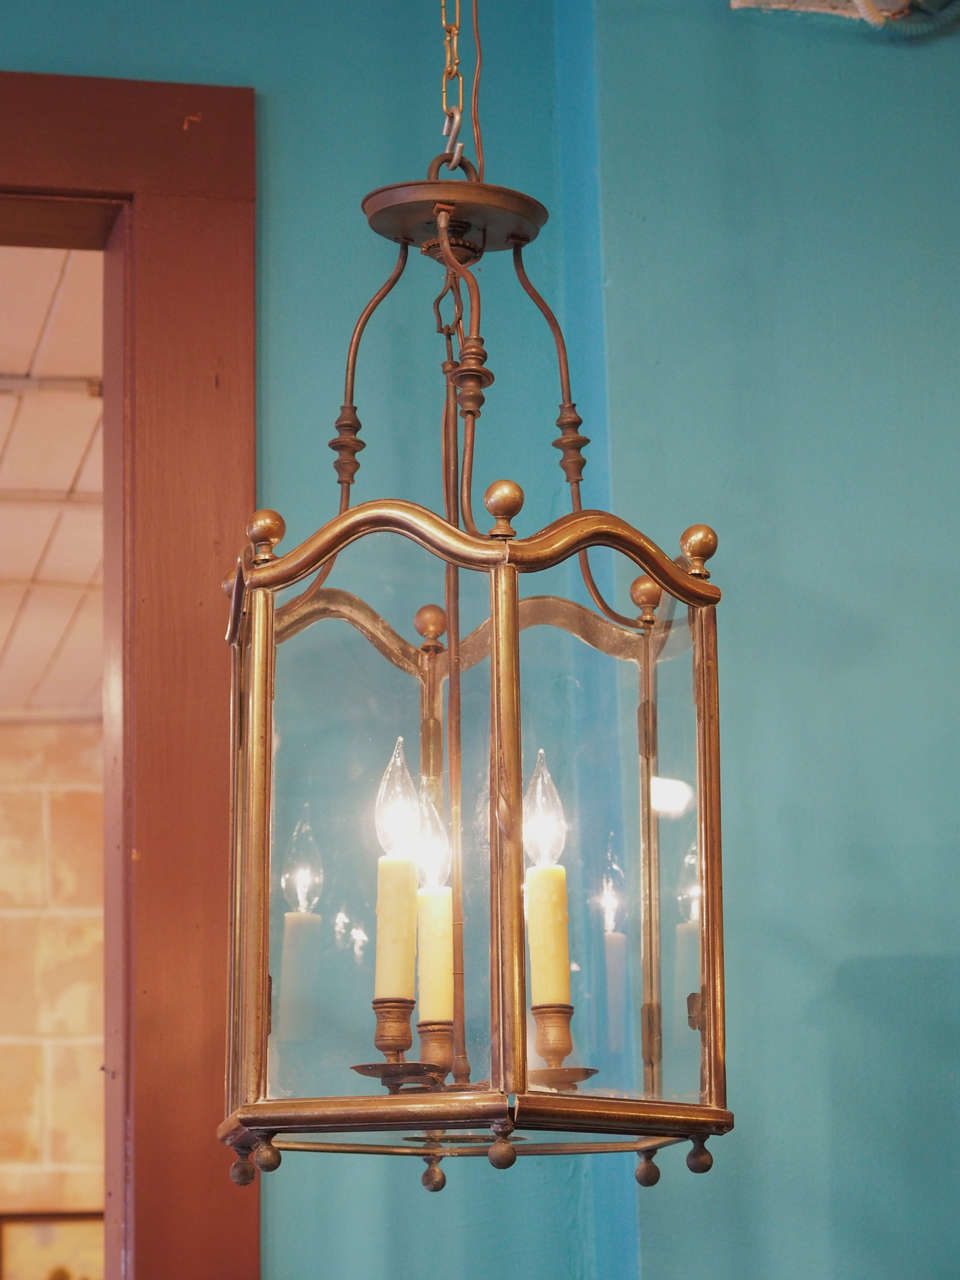 Large-scale 19th century French bronze lantern in the Louis XV taste.